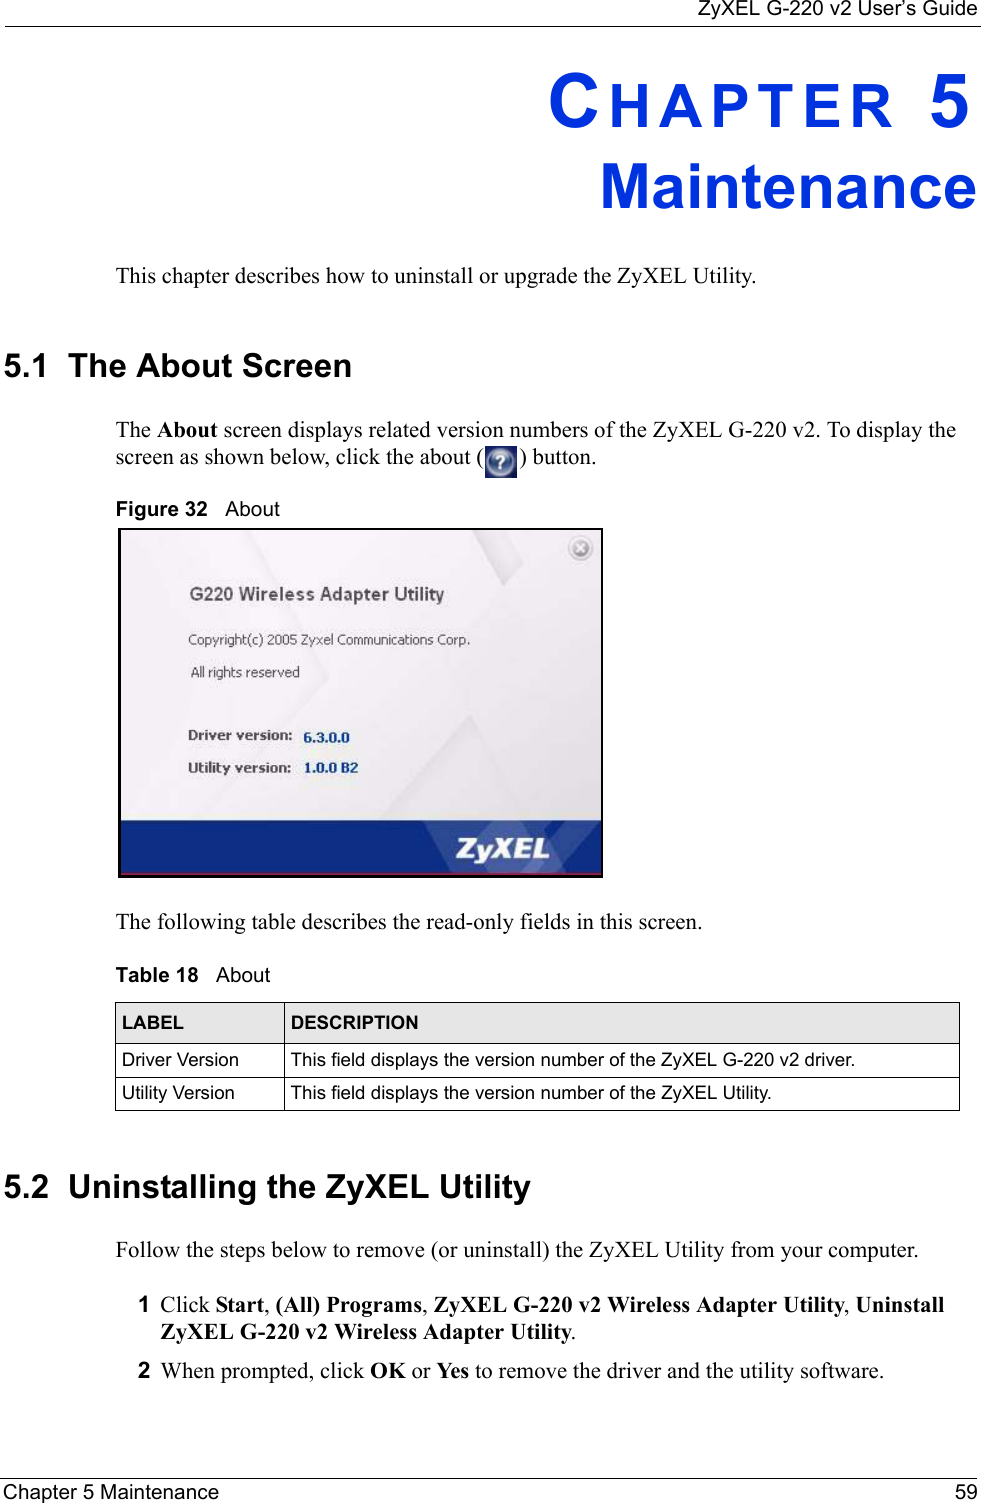 ZyXEL G-220 v2 User’s GuideChapter 5 Maintenance 59CHAPTER 5MaintenanceThis chapter describes how to uninstall or upgrade the ZyXEL Utility.5.1  The About Screen The About screen displays related version numbers of the ZyXEL G-220 v2. To display the screen as shown below, click the about ( ) button.Figure 32   About The following table describes the read-only fields in this screen. 5.2  Uninstalling the ZyXEL Utility Follow the steps below to remove (or uninstall) the ZyXEL Utility from your computer.1Click Start, (All) Programs, ZyXEL G-220 v2 Wireless Adapter Utility, Uninstall ZyXEL G-220 v2 Wireless Adapter Utility.2When prompted, click OK or Yes  to remove the driver and the utility software.Table 18   About LABEL DESCRIPTIONDriver Version This field displays the version number of the ZyXEL G-220 v2 driver.Utility Version This field displays the version number of the ZyXEL Utility.